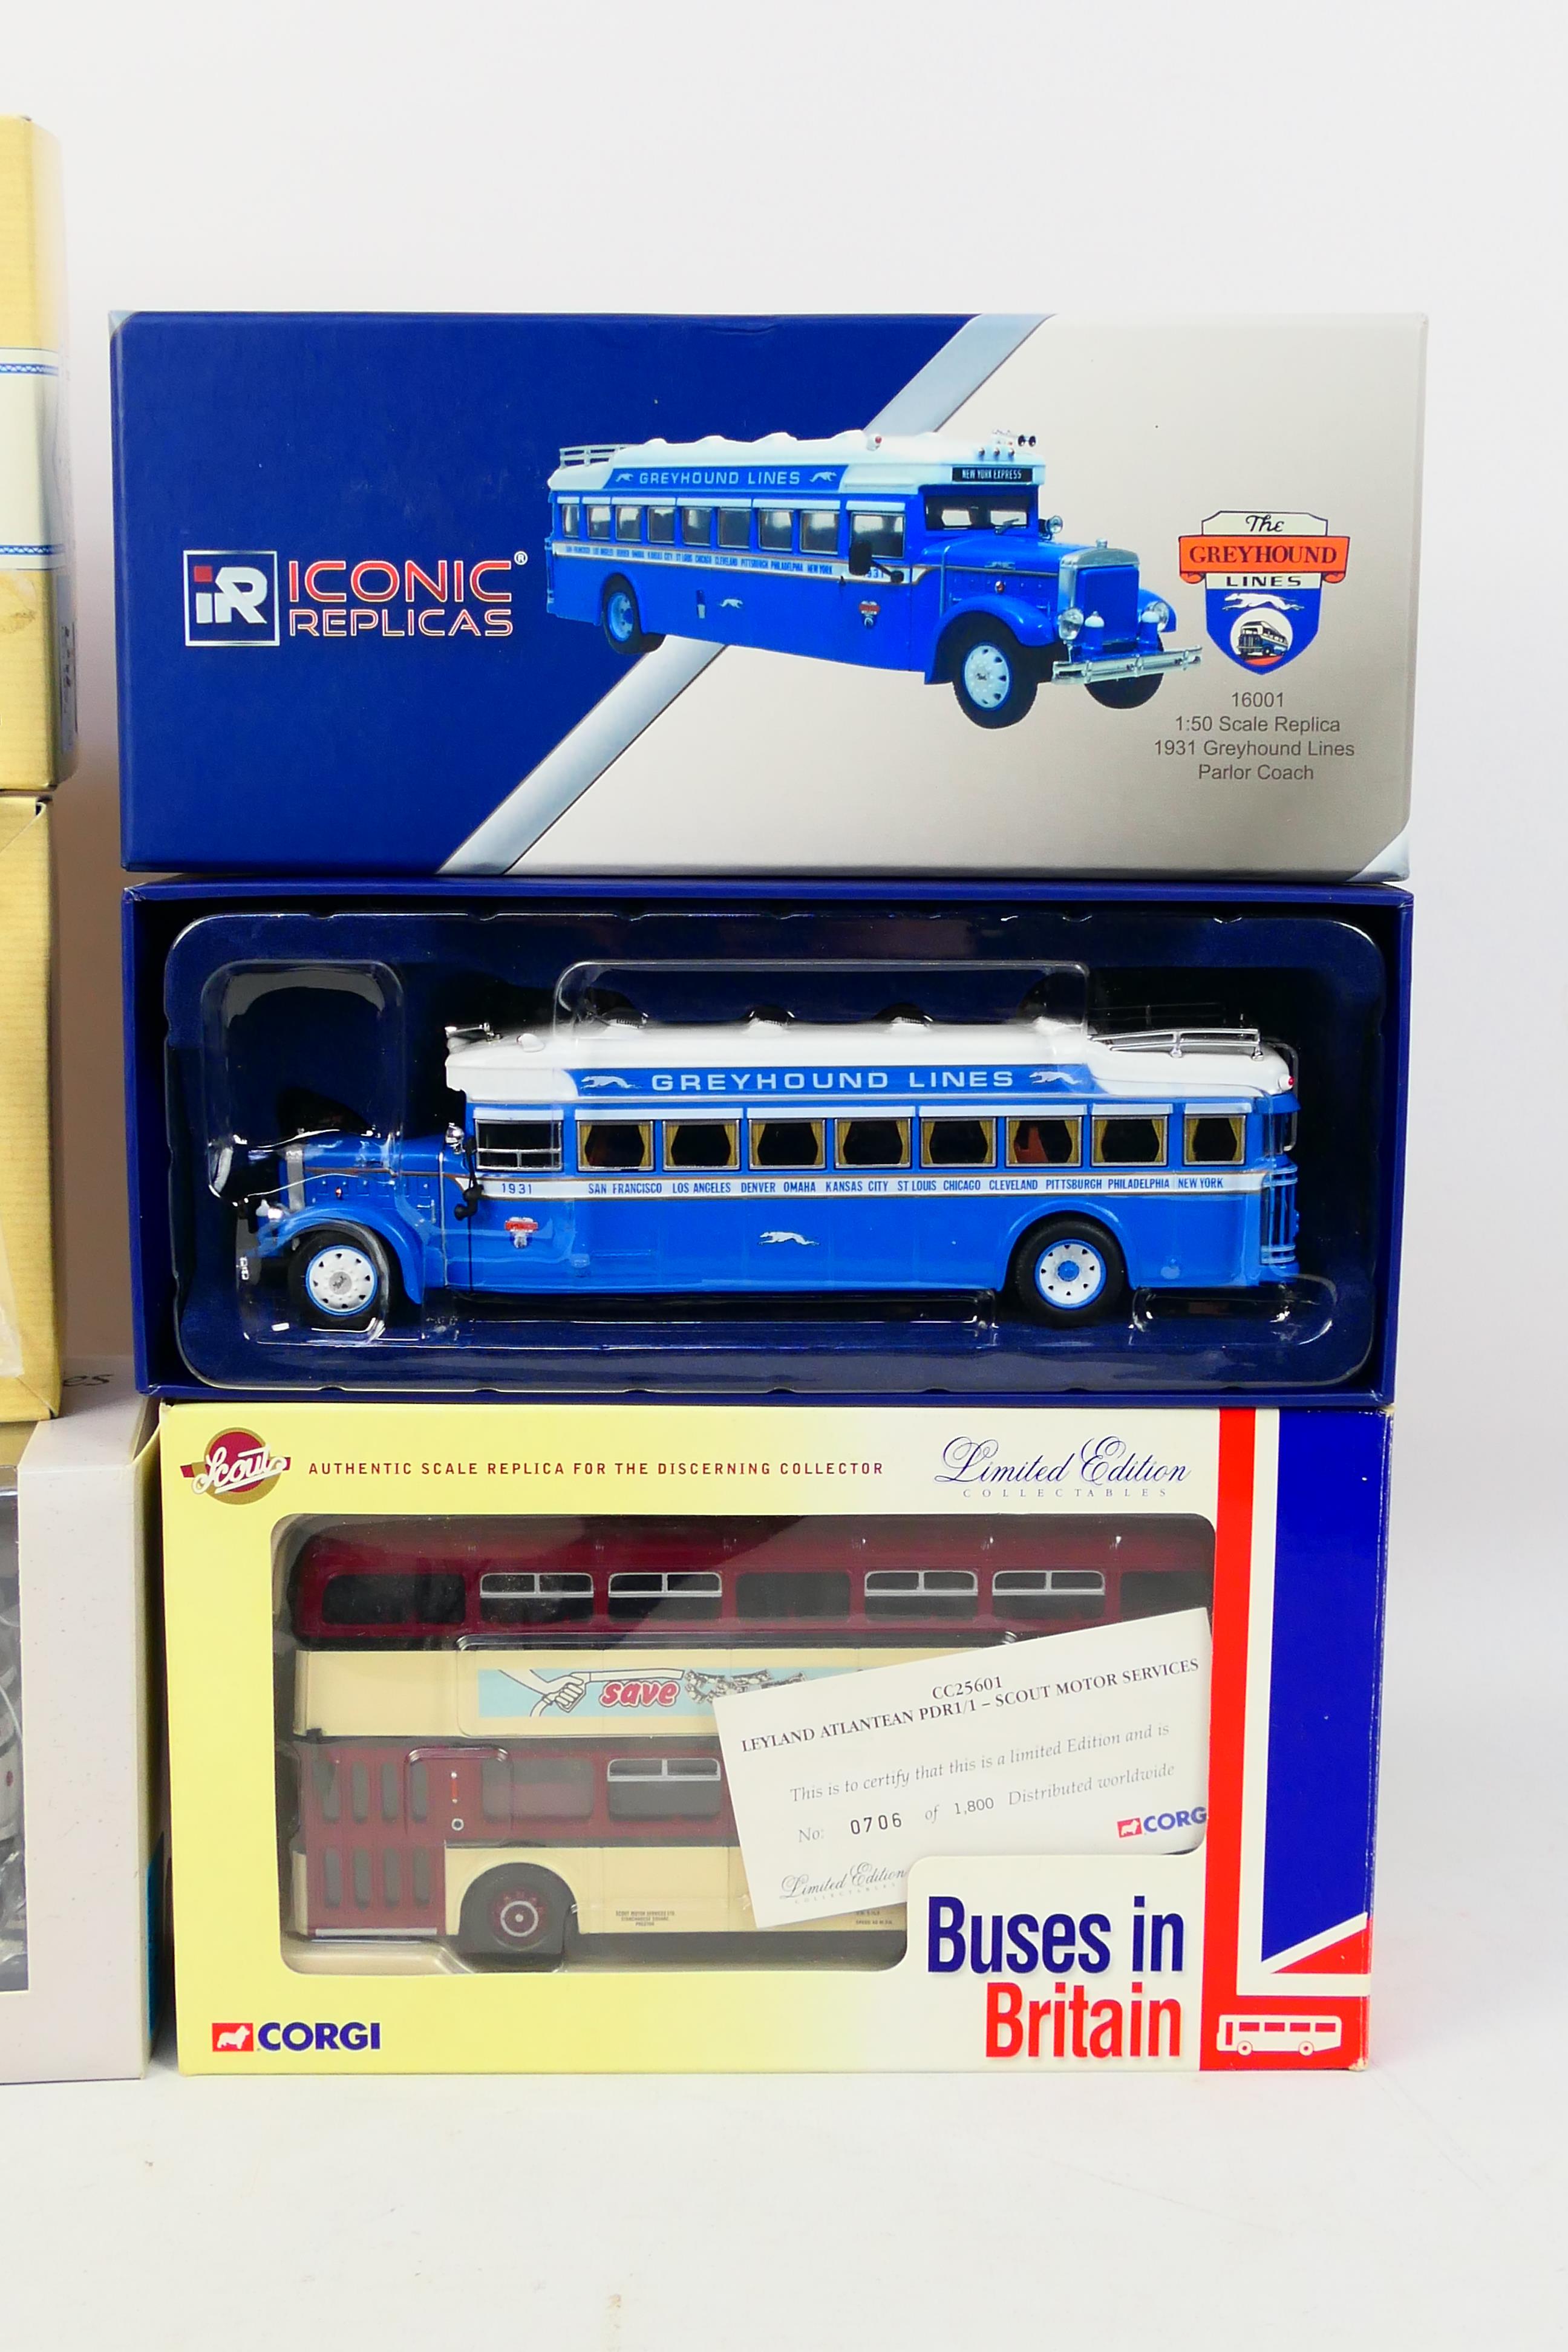 Corgi - Iconic Replicas - American Heritage - 4 x bus models in 1:50 scale, - Image 3 of 3